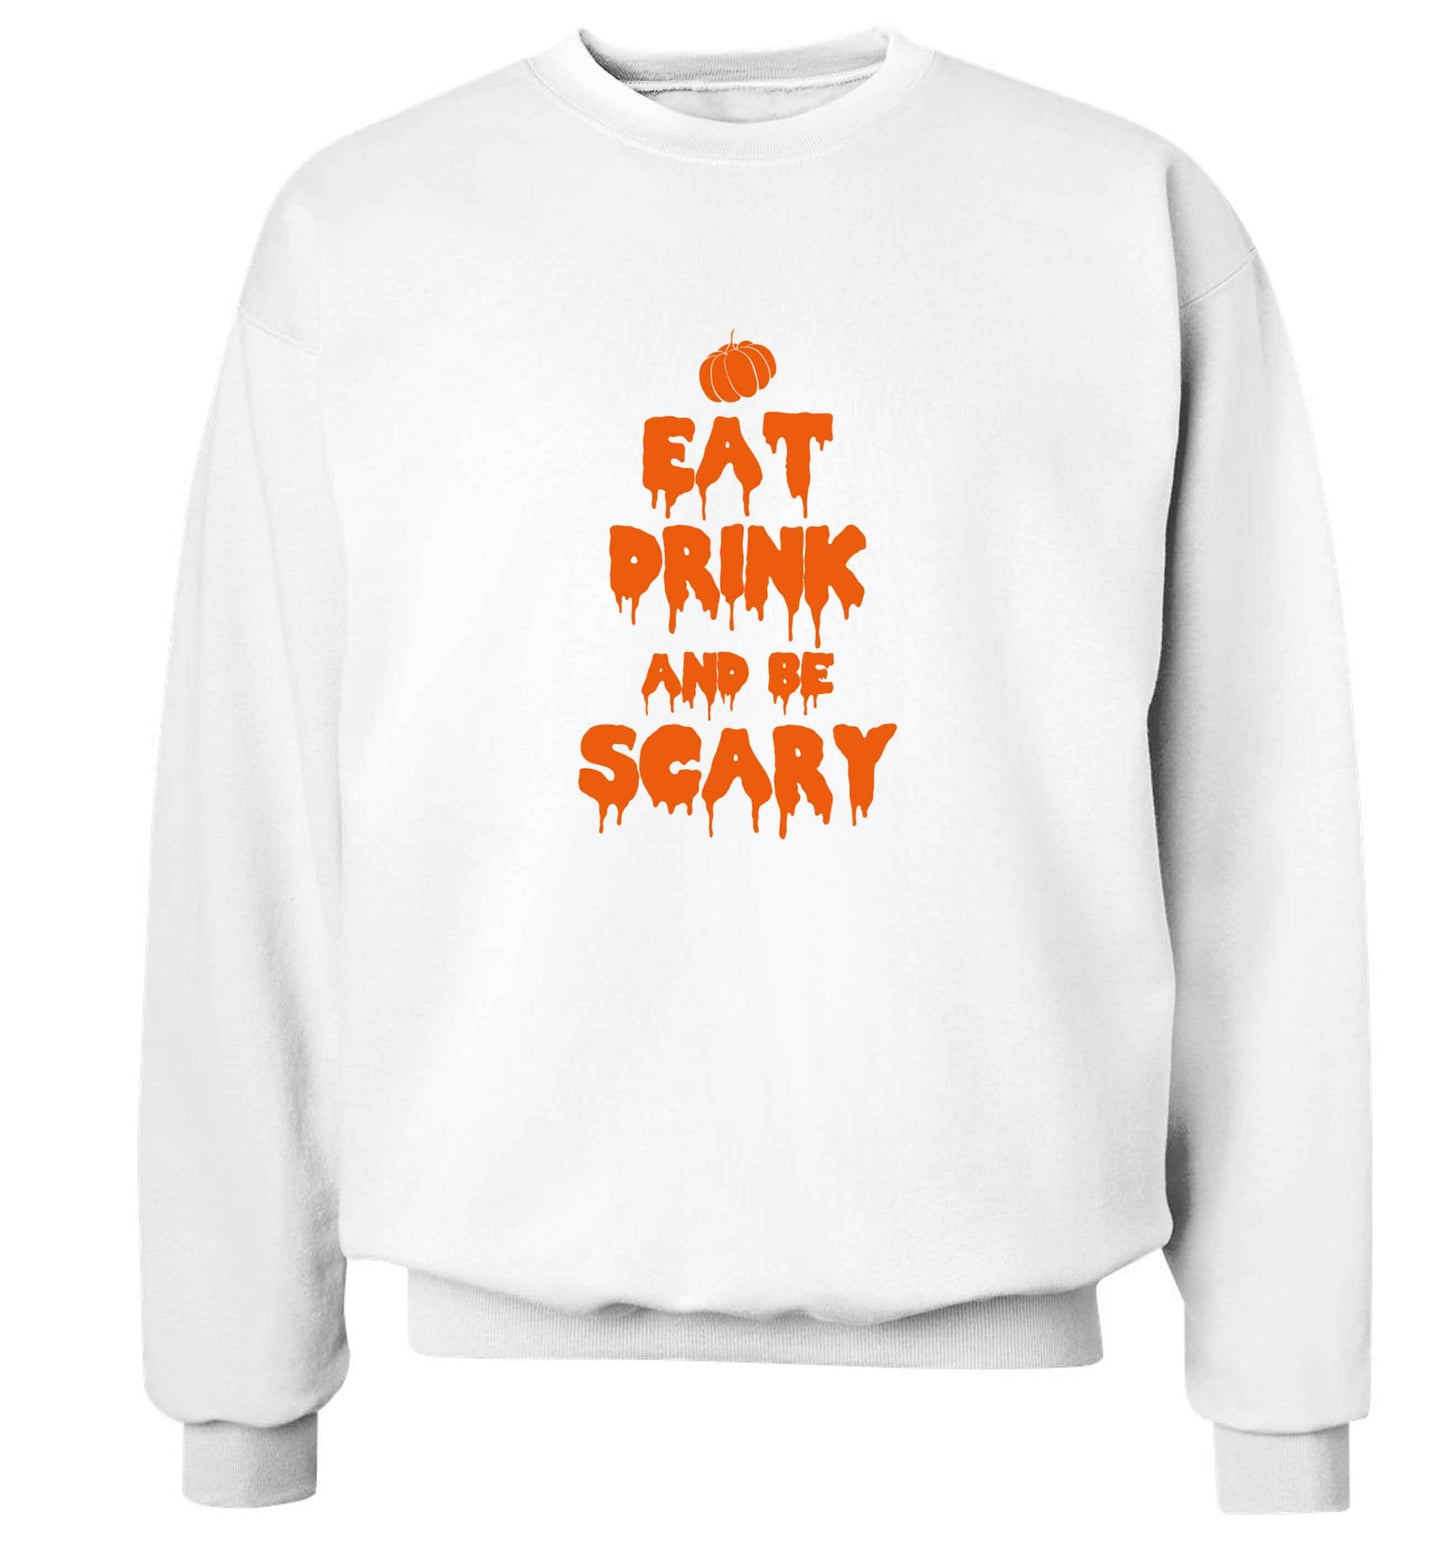 Eat drink and be scary adult's unisex white sweater 2XL